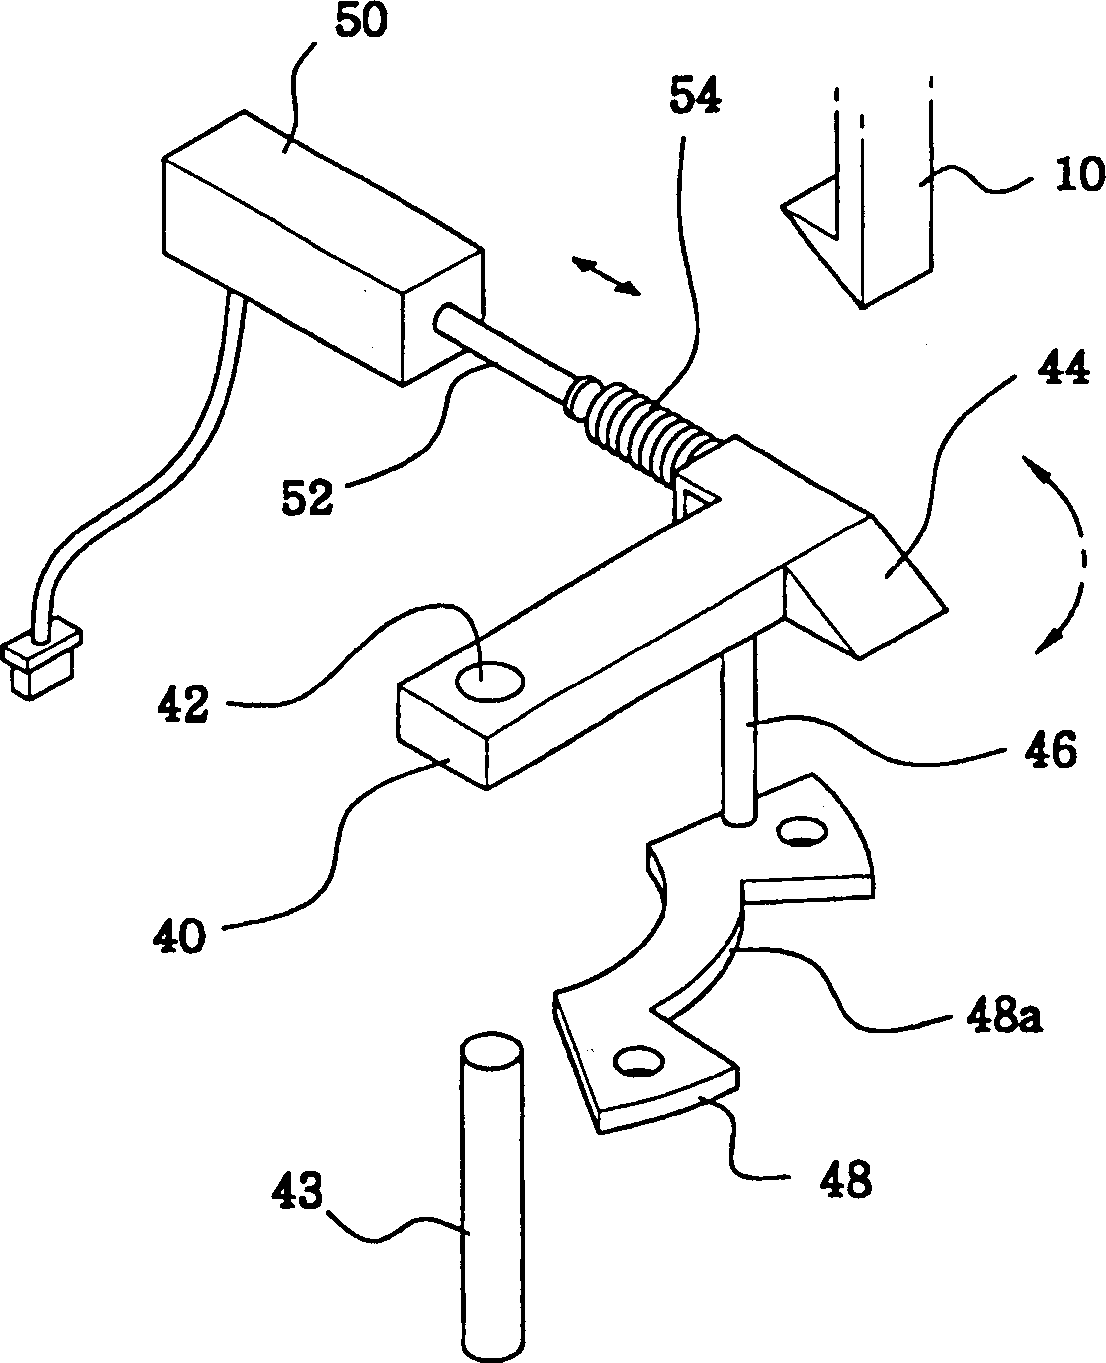 Device for opening and closing CD player cover